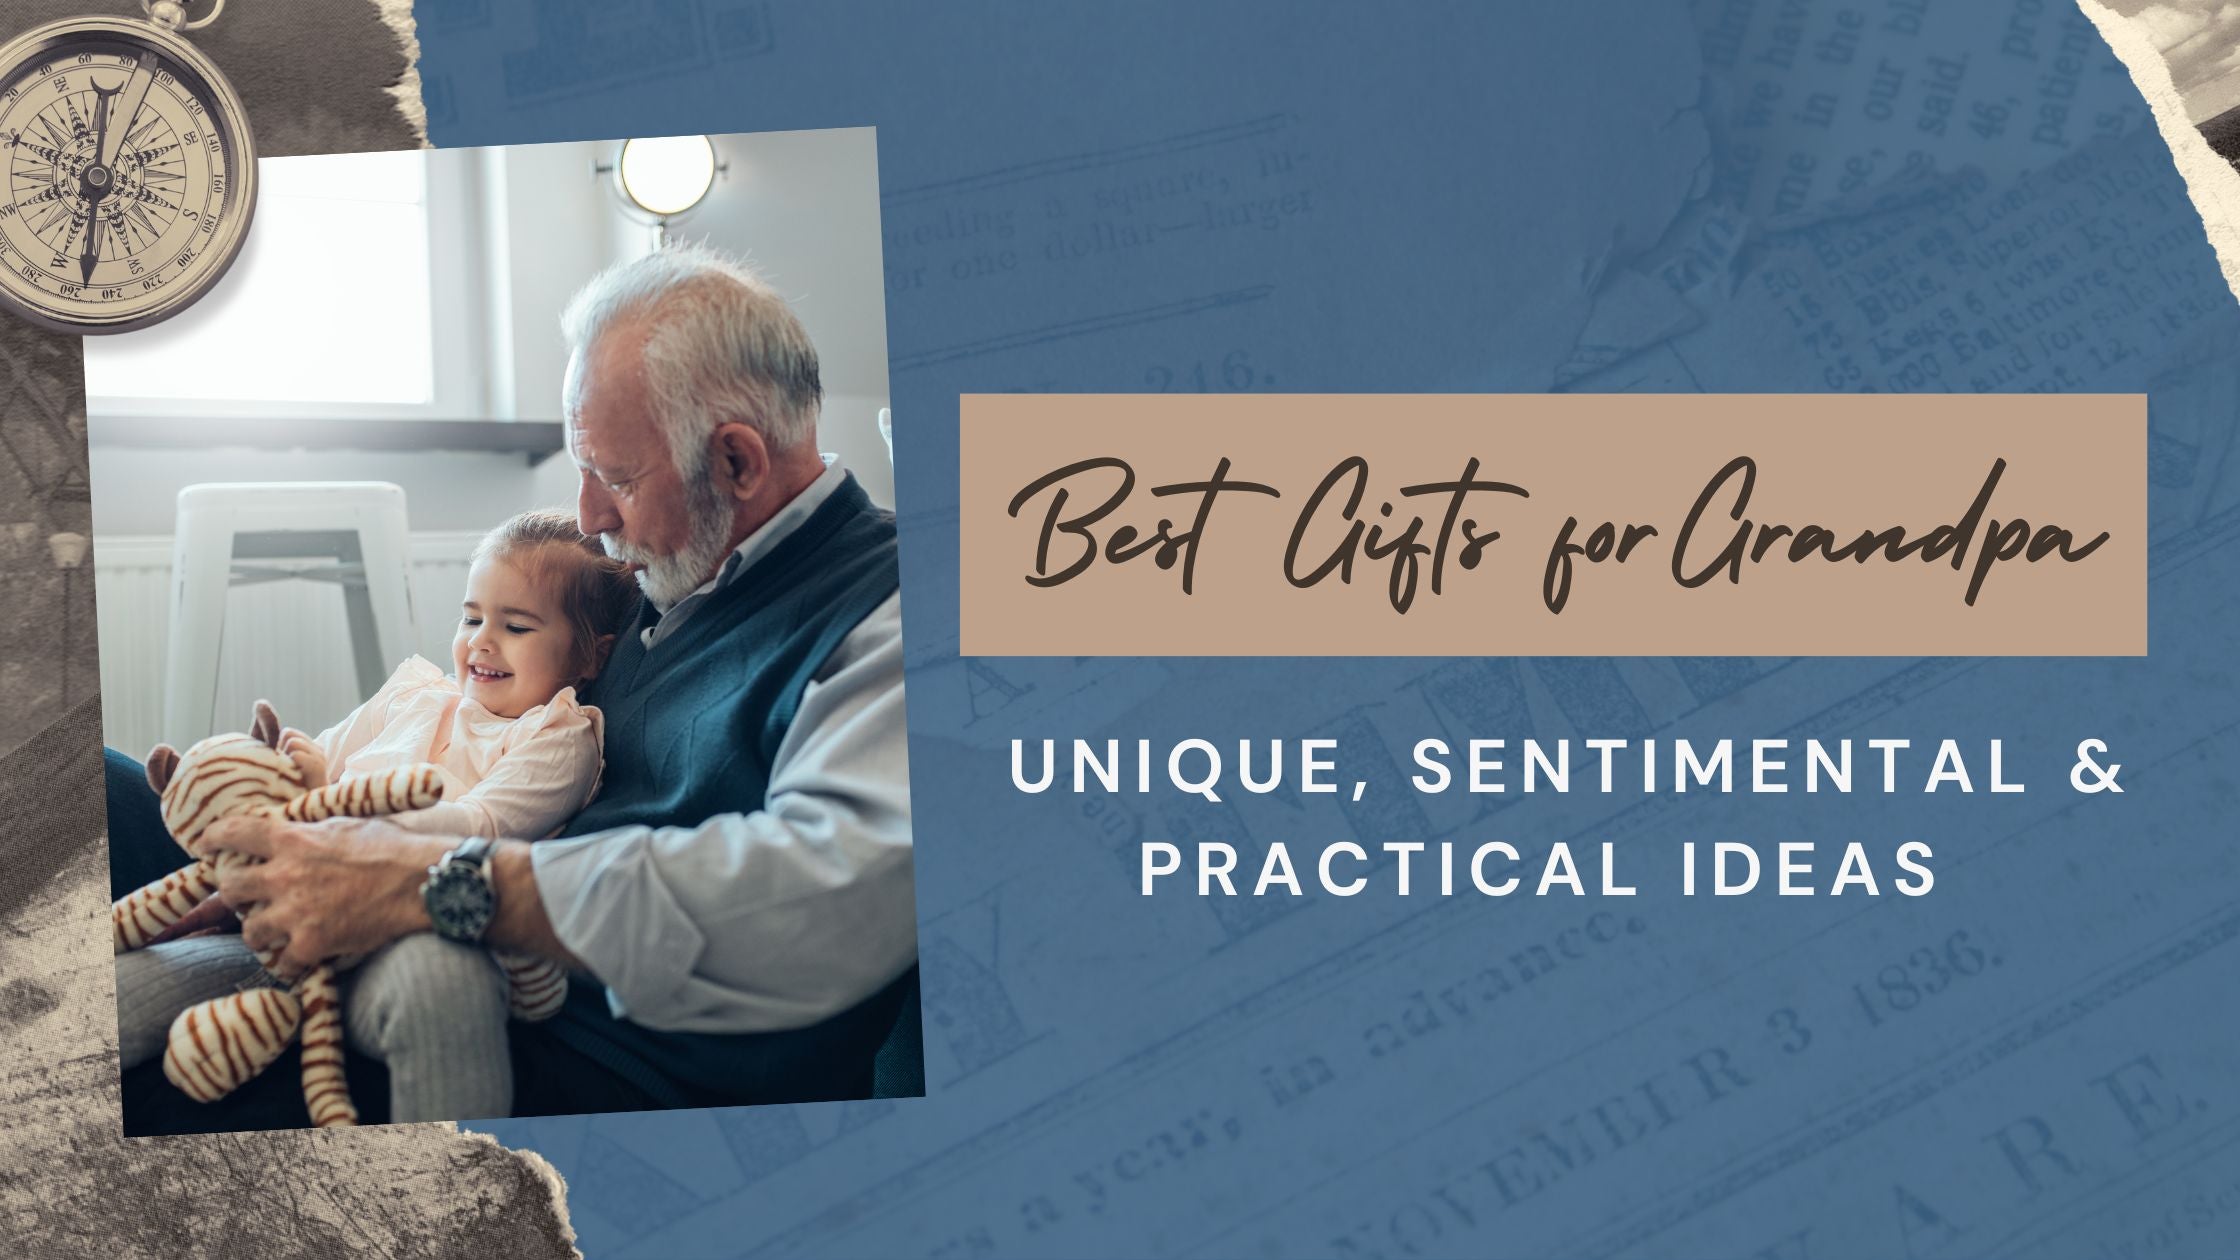 51 Best Gifts for Grandpa: Unique, Sentimental & Practical Ideas 2022 - FamiPrints | Trending Customizable Family Gifts